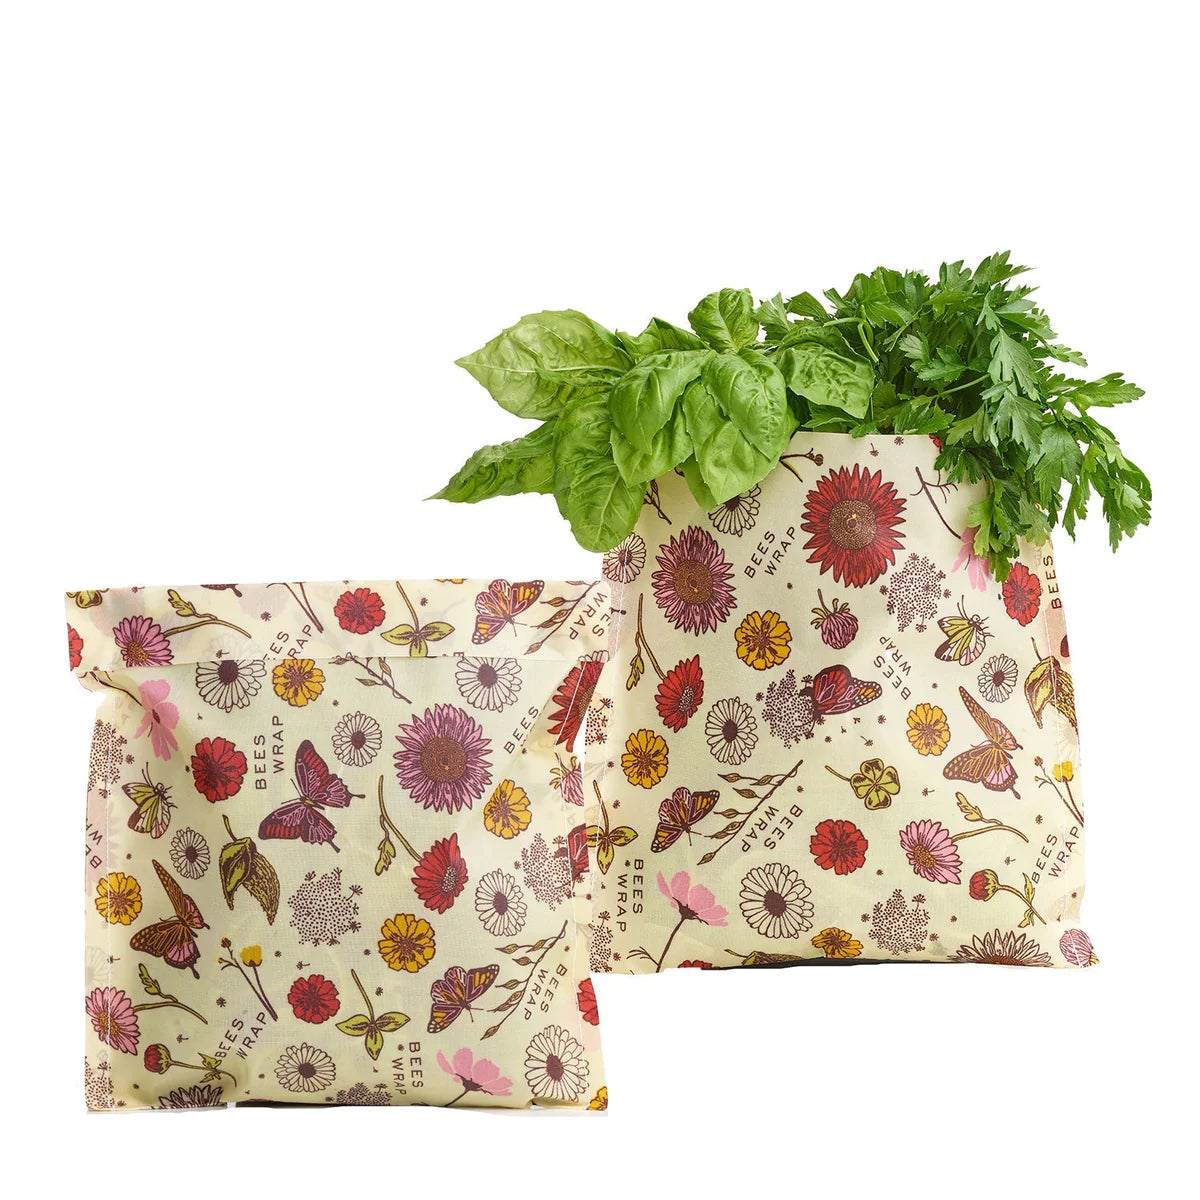 Bee's Wrap Produce Bag 2 Pack